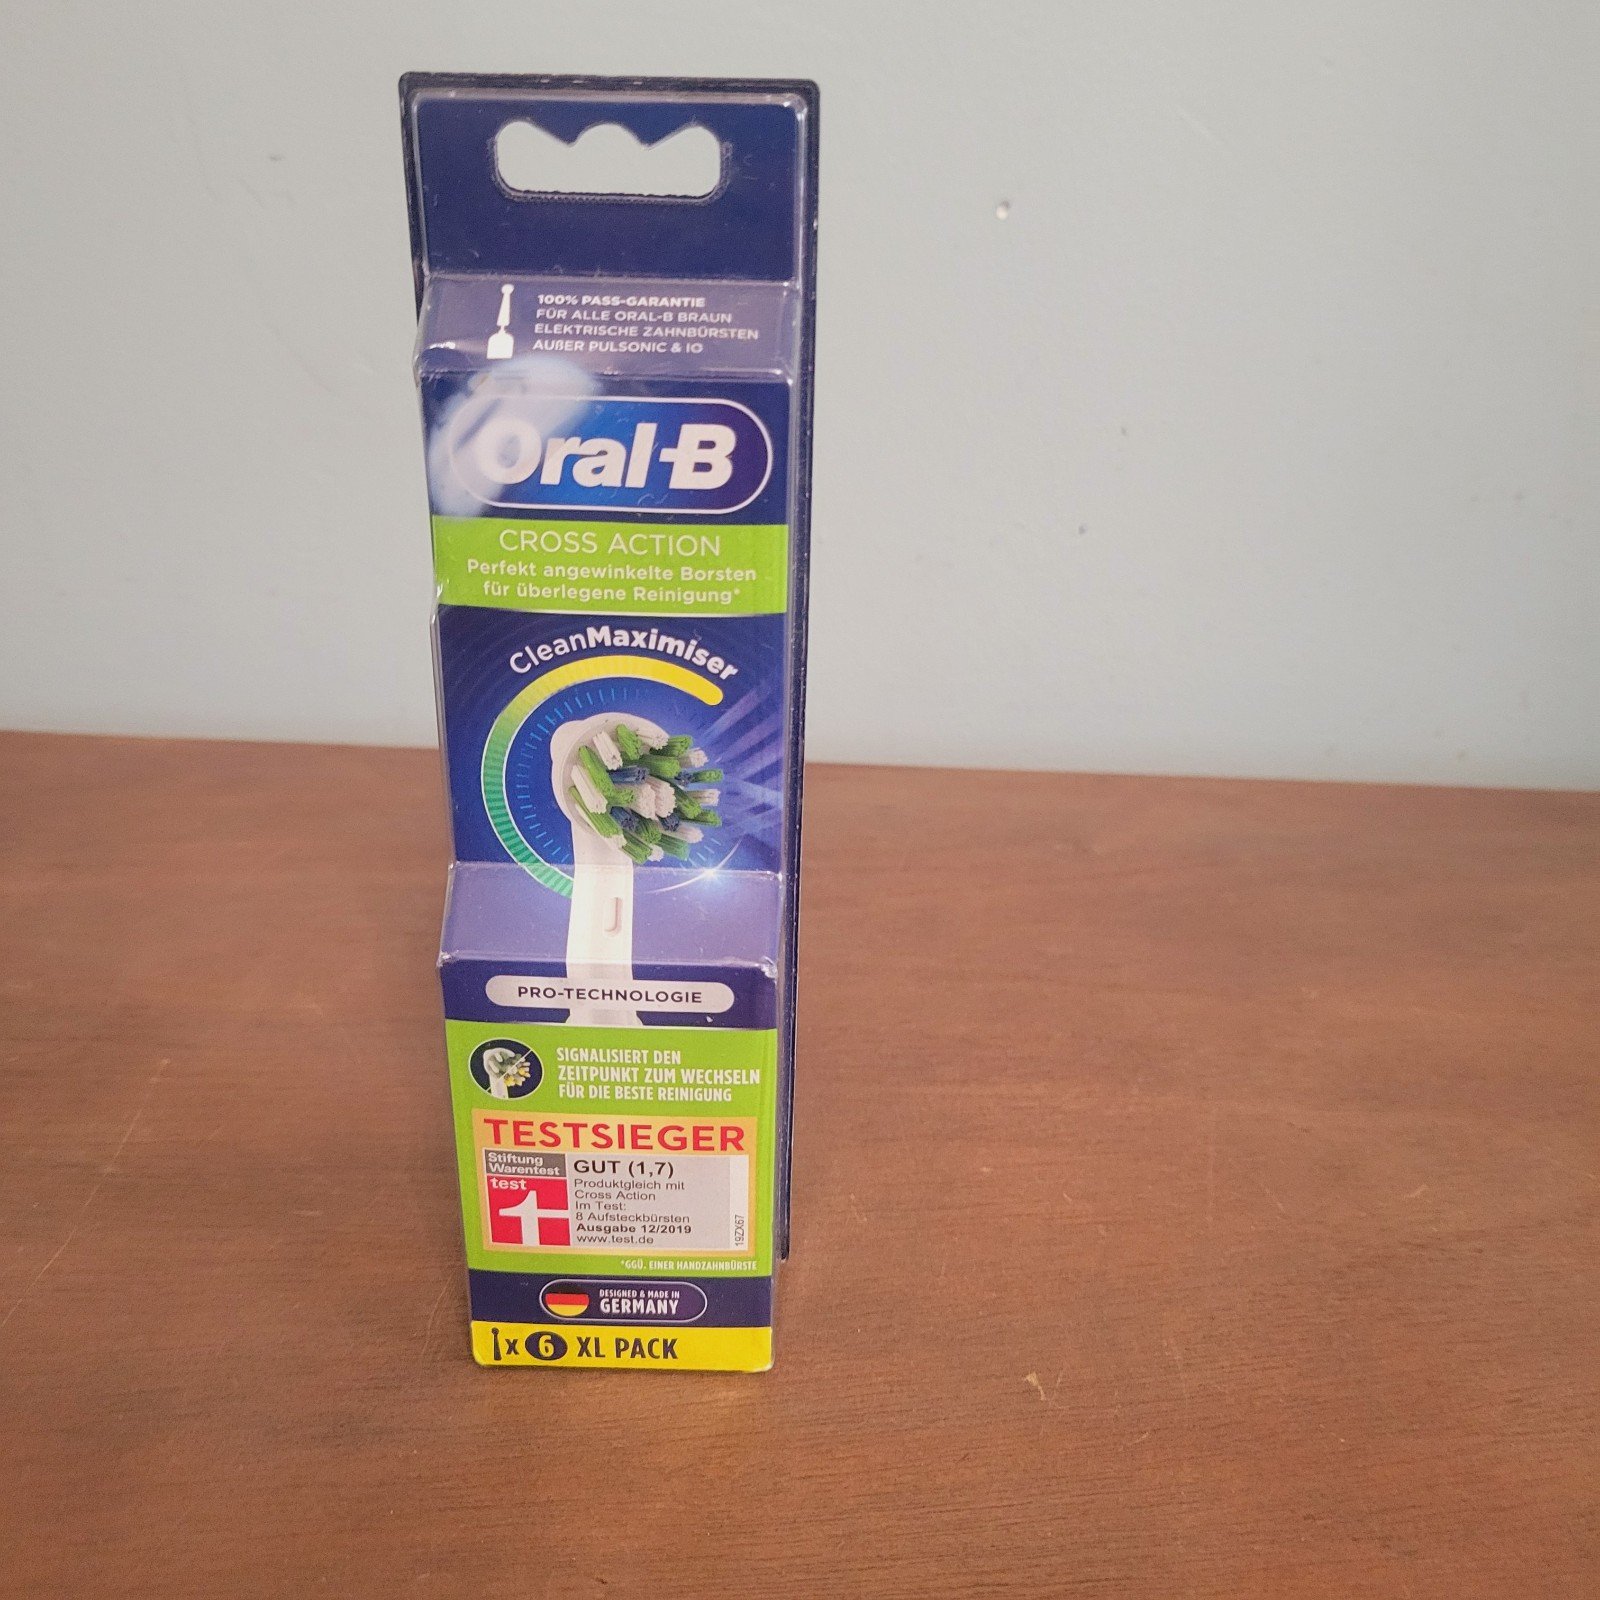 Oral-B Cross Action CleanMaximiser Replacement Electric